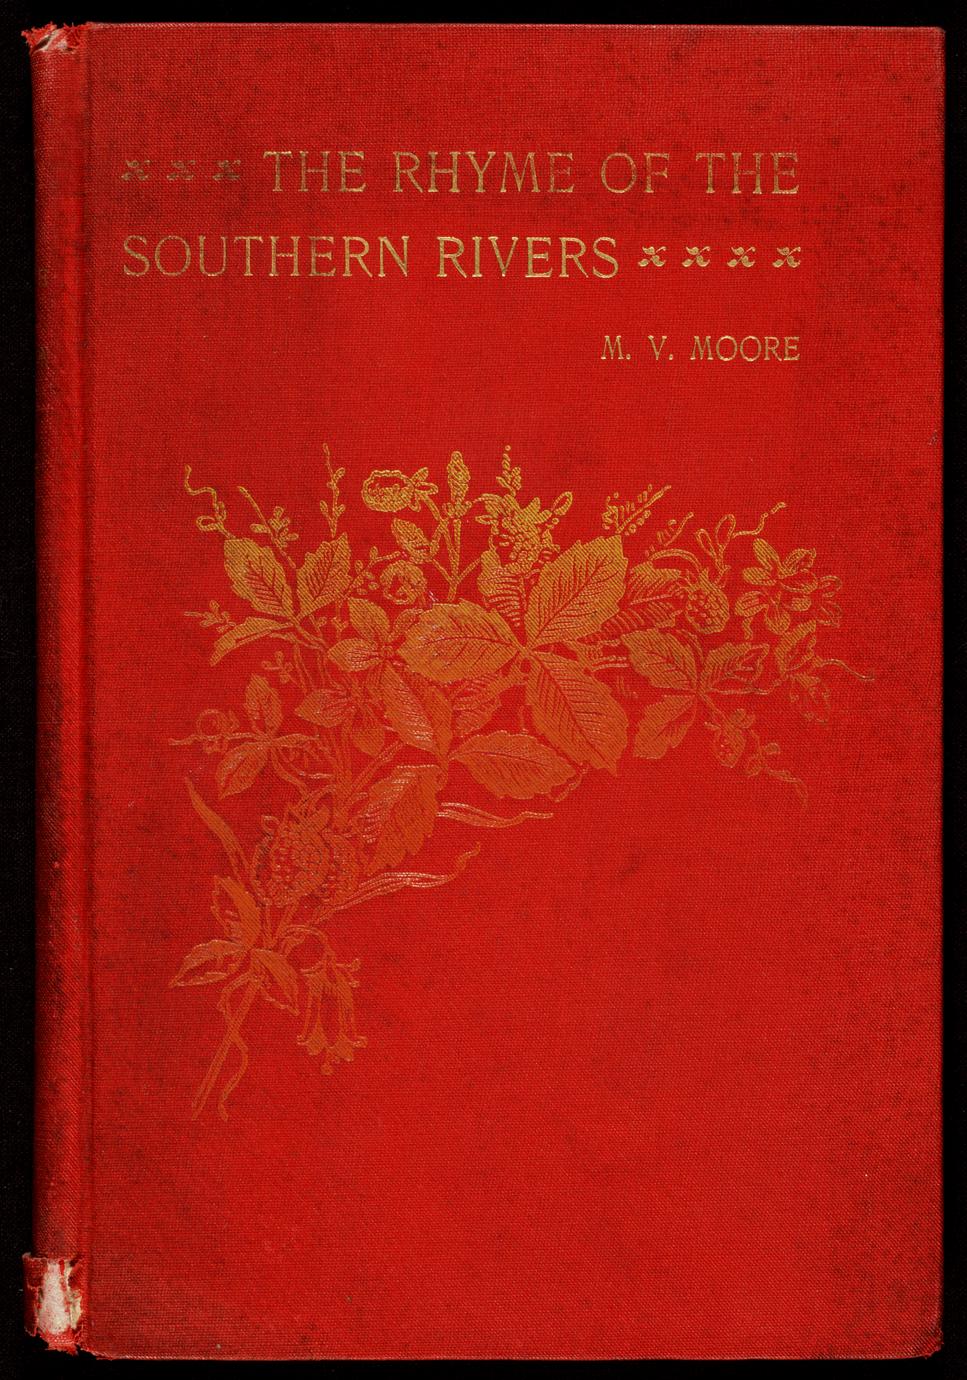 The rhyme of the southern rivers : with notes historical, traditional, geographical, etymological, etc. : for the use of teachers, schools, and general readers (1 of 2)